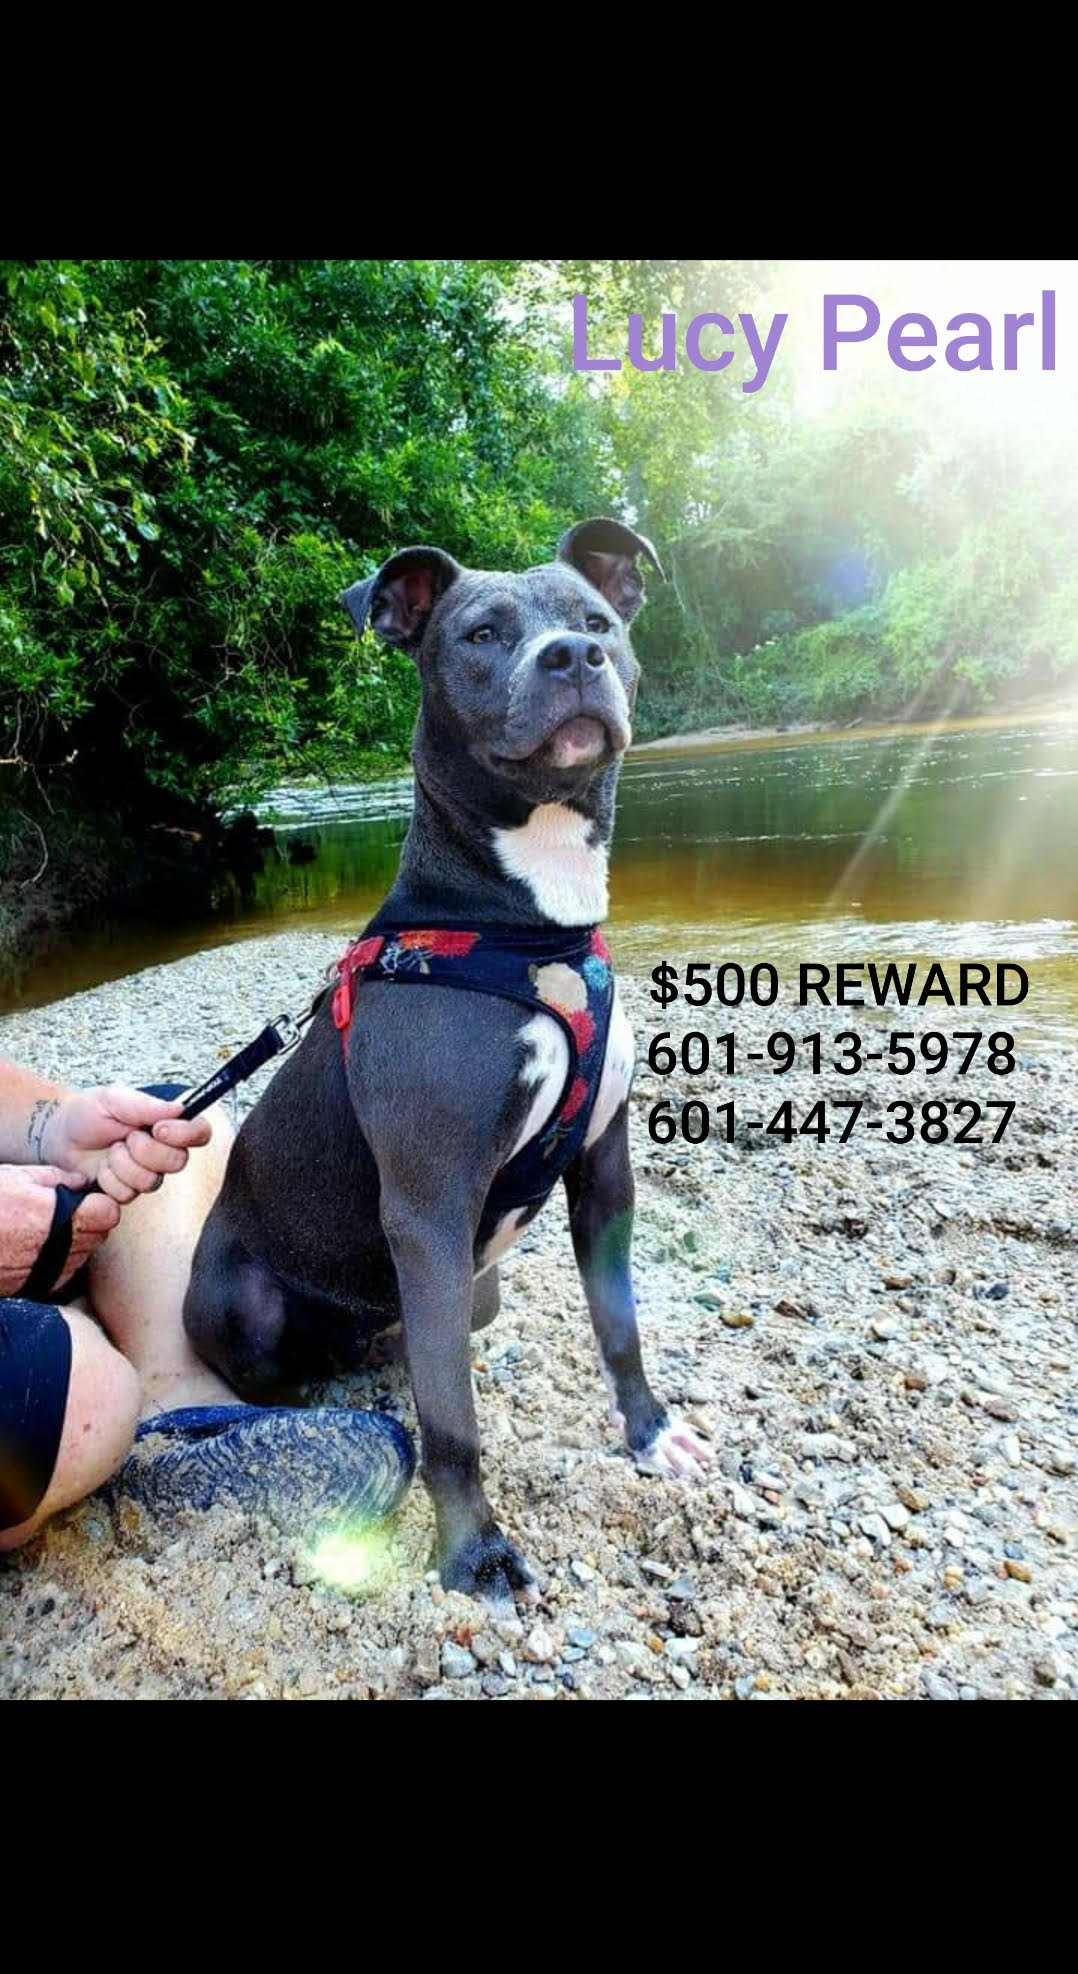 ﻿Our dog Lucy Pearl is missing. She is our heart and soul. My husband and I dont have kids so our fur-babies are our kids. We had a very nice lady offer $500 for her safe return on our behalf. We are at our wits end of places to look and post about her.  Shes a year and a half. Blue & white pit bull dog. She is spayed and microchipped. The very end of her tail had to be docked due to an injury. She has on a black and red collar with Veterinary Associates of Hattiesburg rabies tag. Last seen at our house on R. Thompson Rd Lumberton on 12-7-21 at 3pm